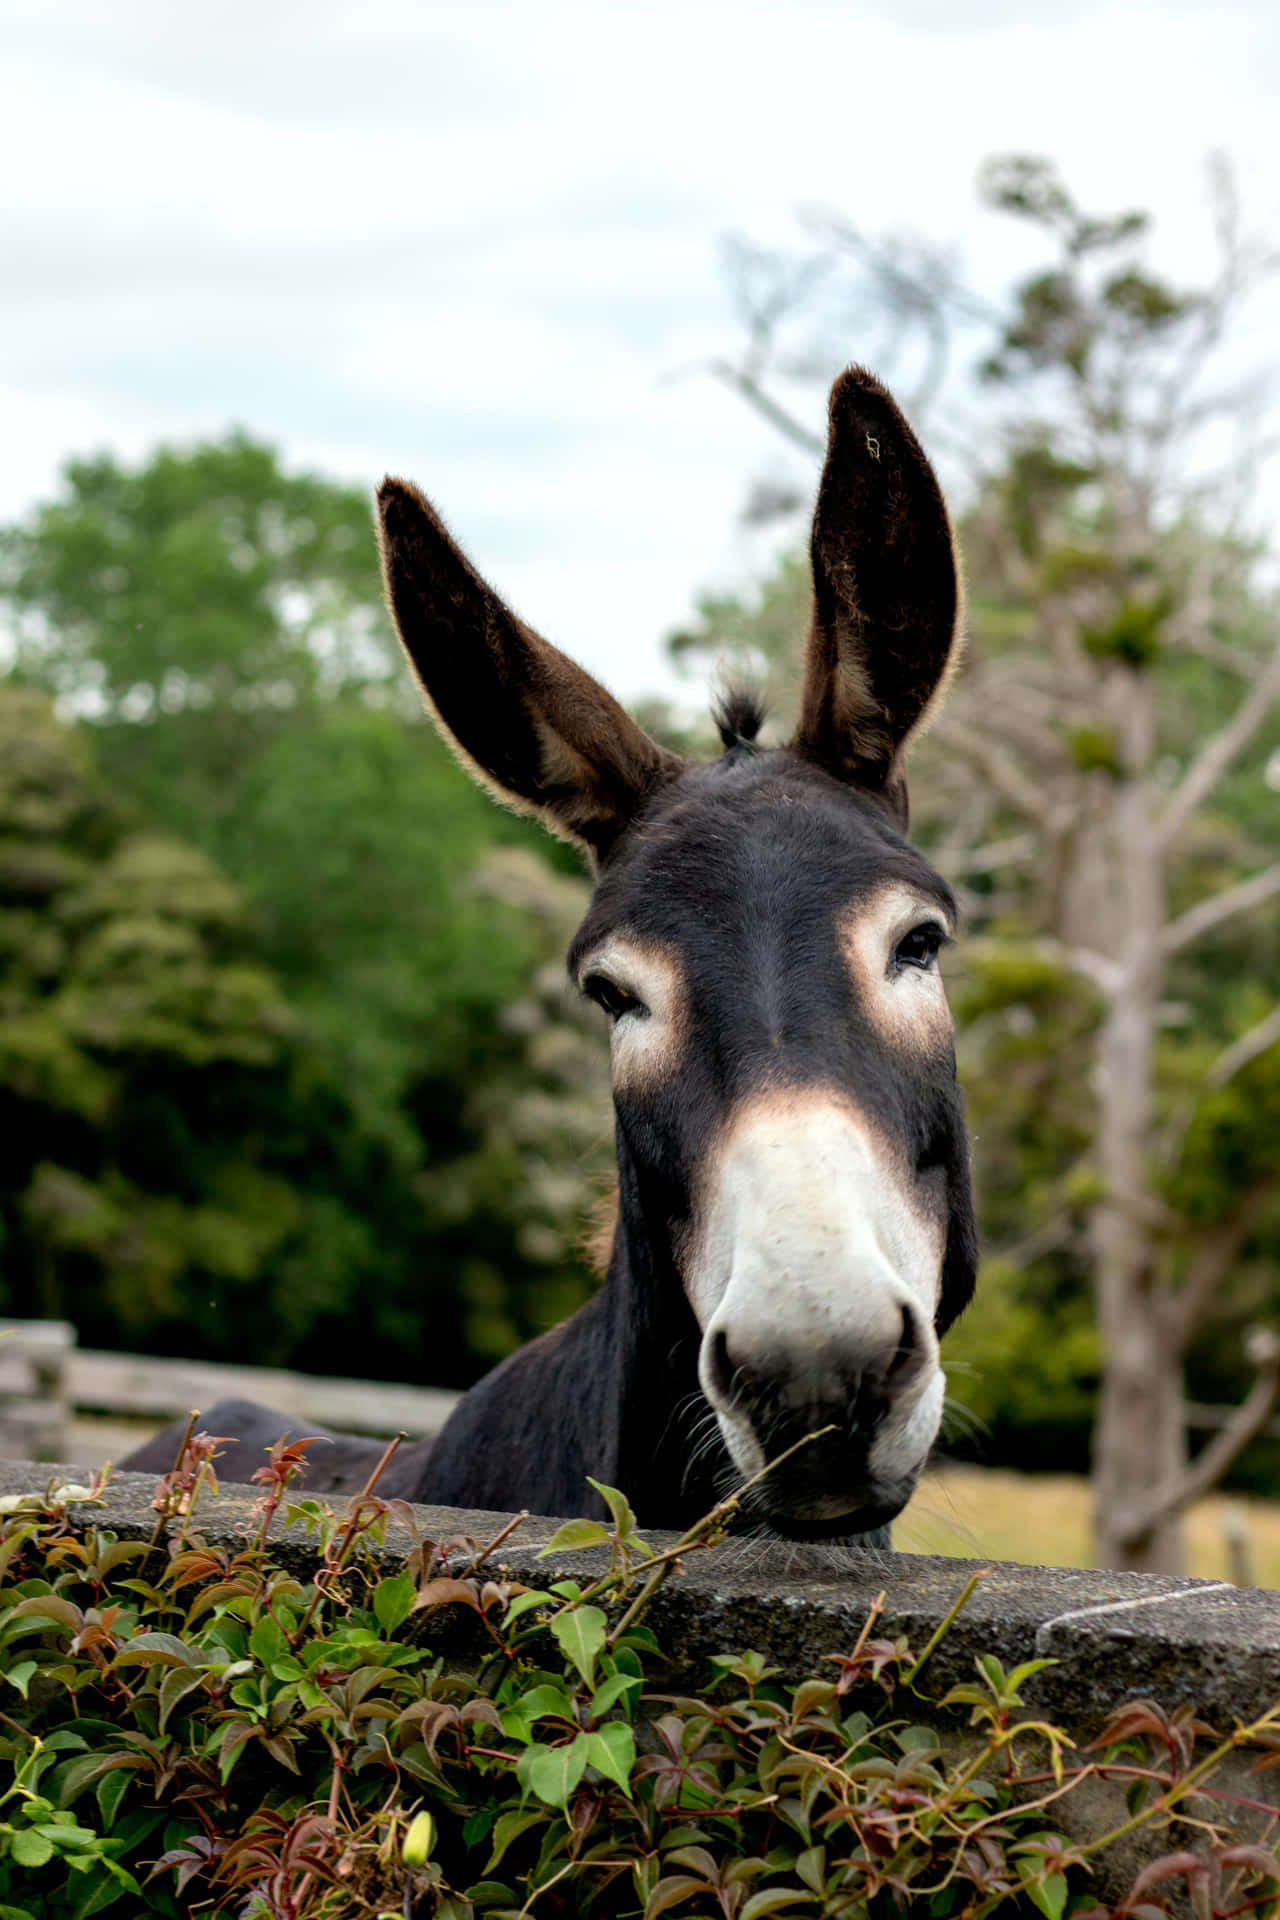 A portrait of an adorable donkey